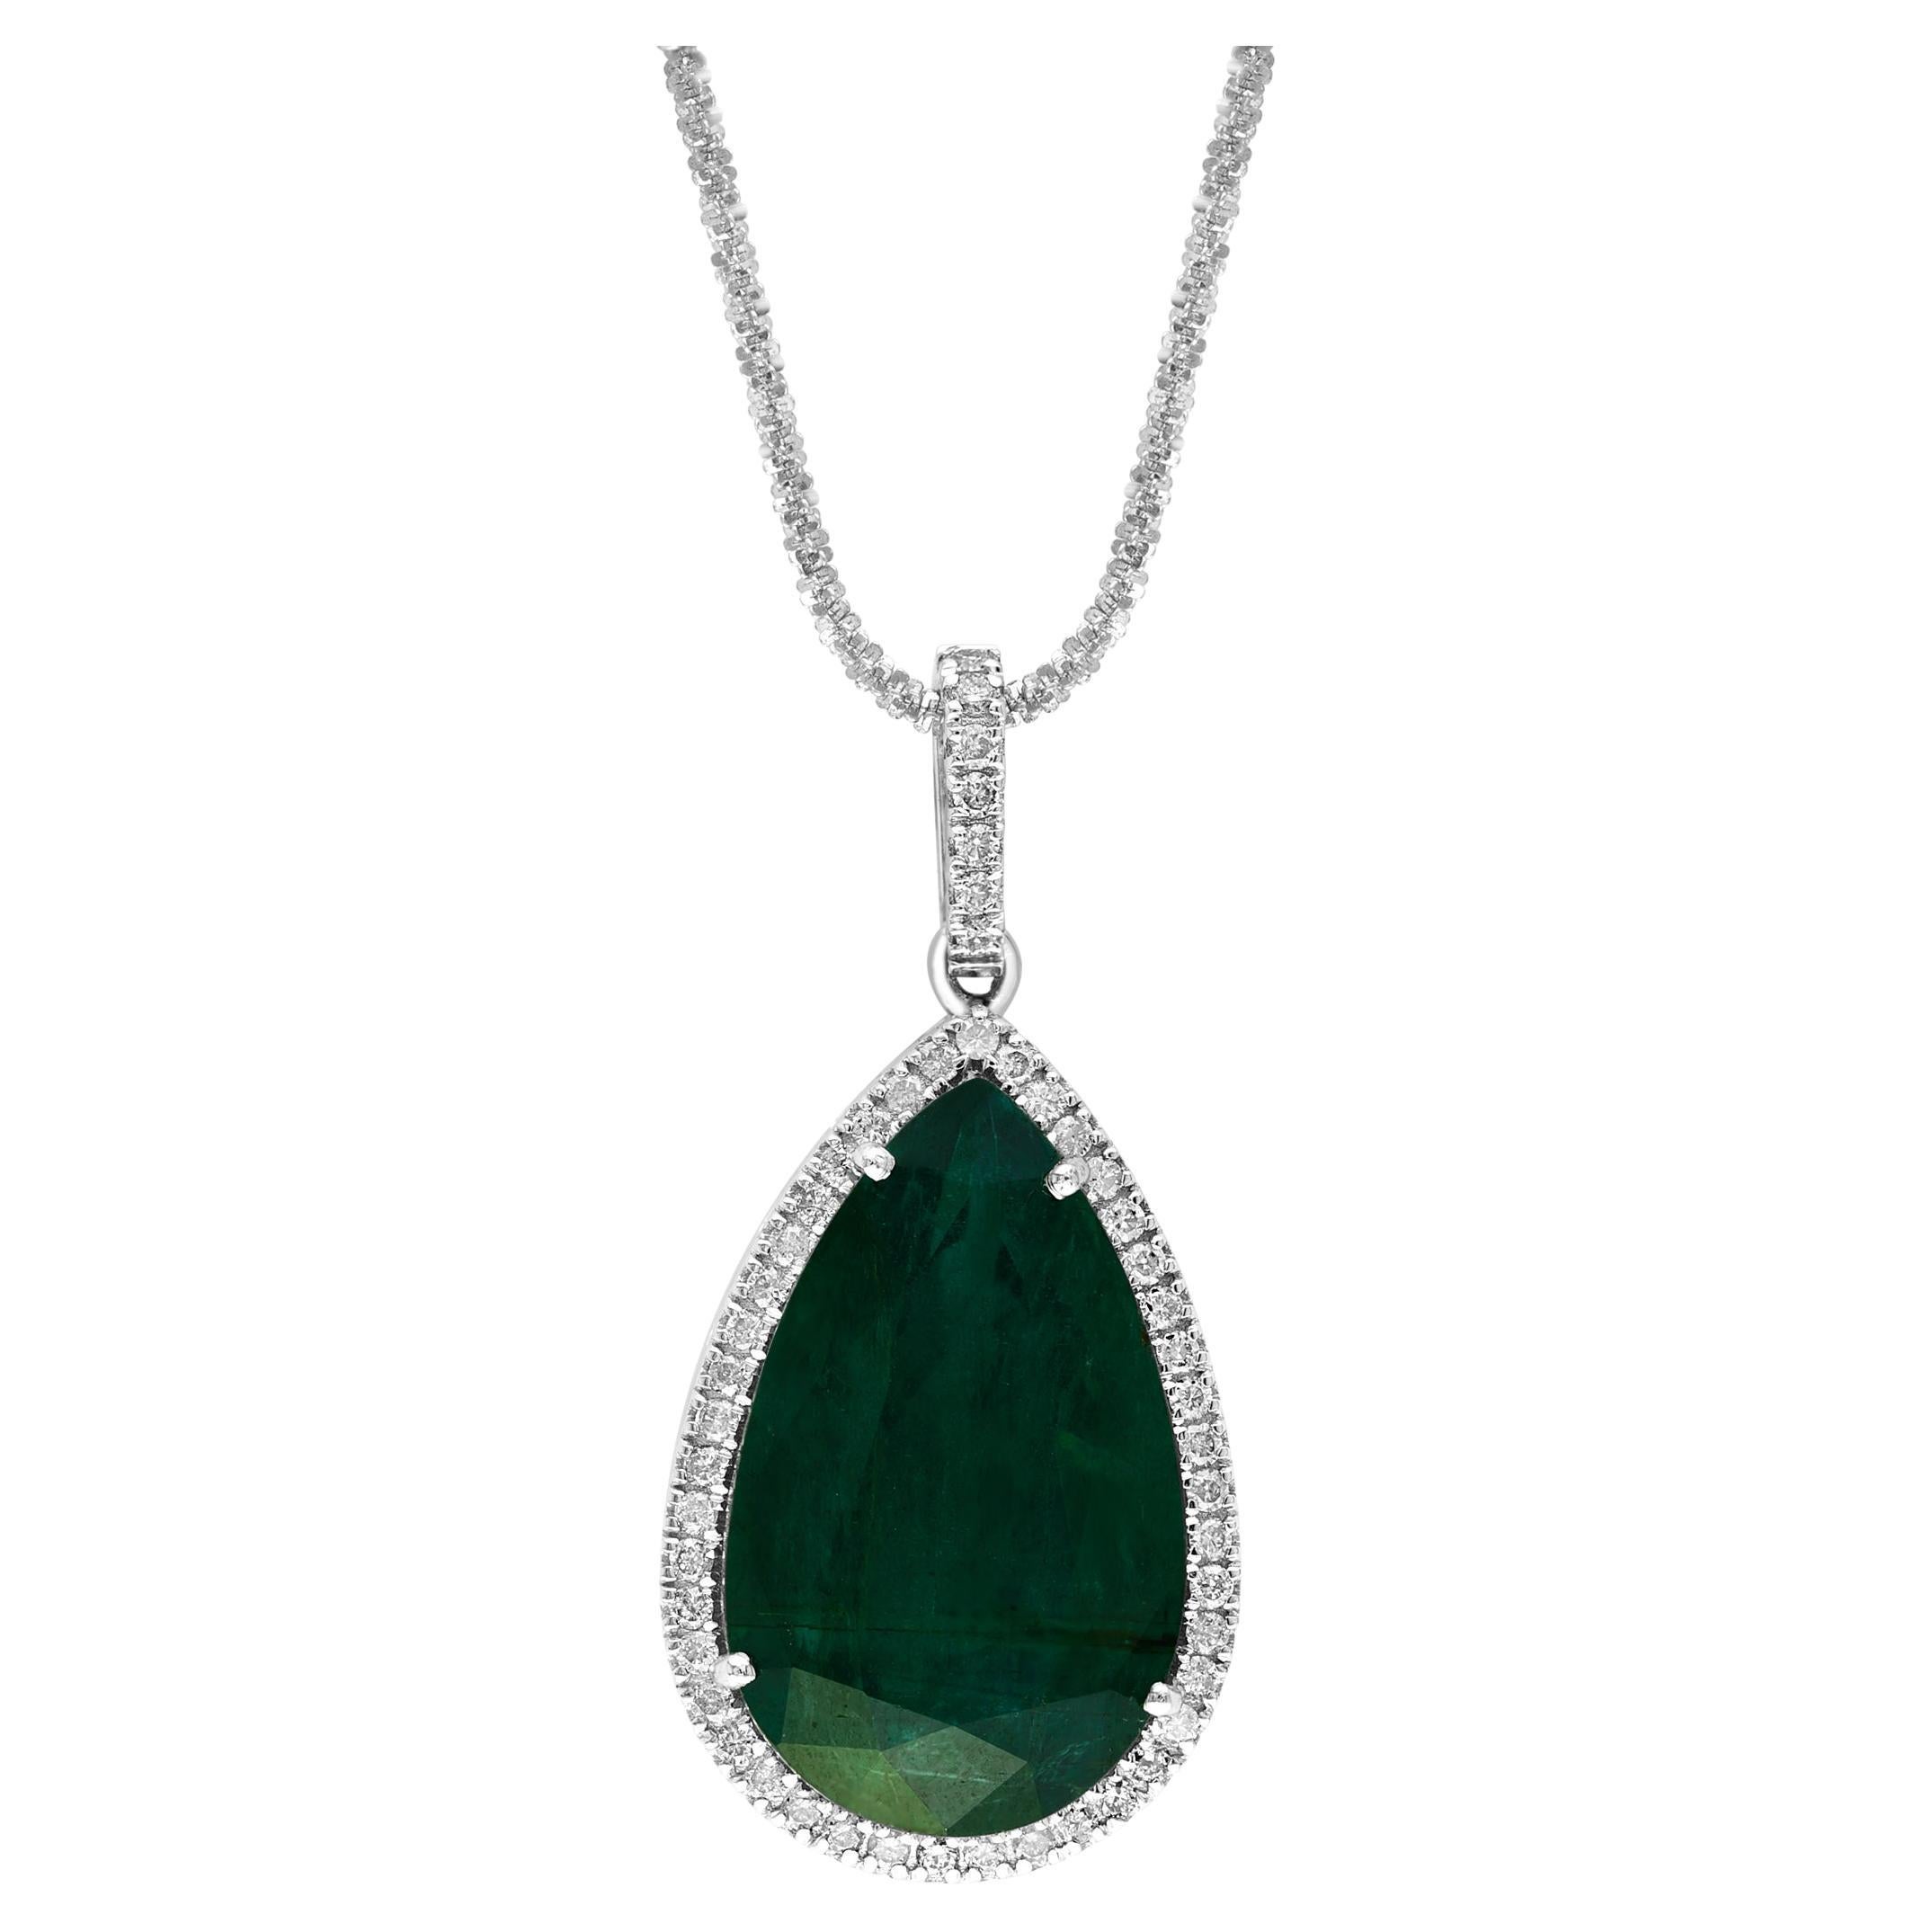 19 Ct Pear Cut Emerald & 1 Ct Diamond Halo Pendent/Necklace 14 KW Gold Chain For Sale